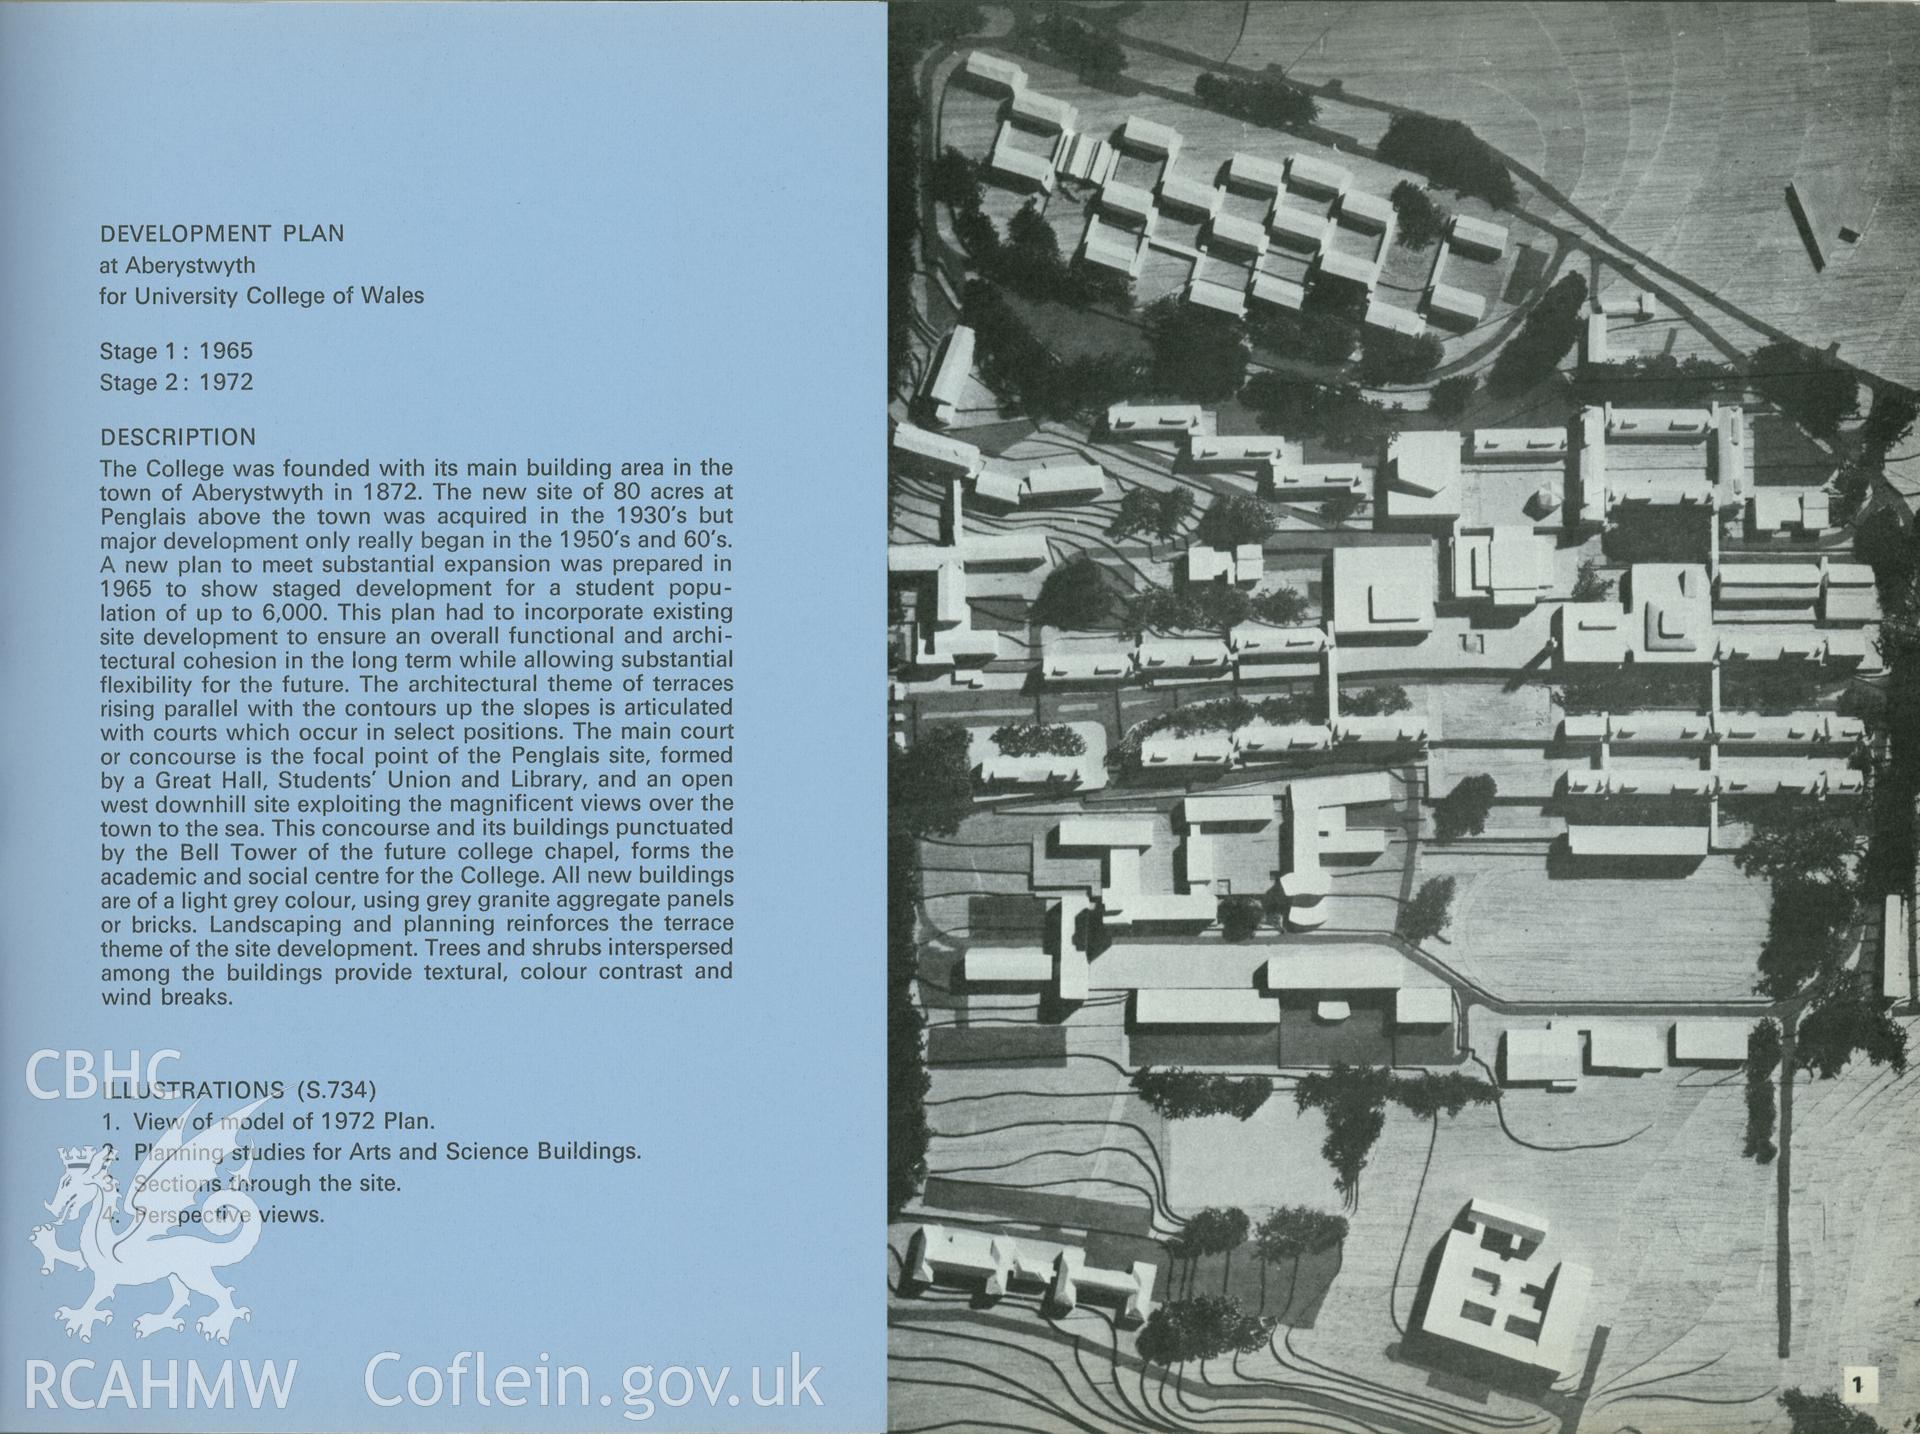 Digital copy of a development plan of Aberystwyth University taken from page 1 of the Percy Thomas Archive.